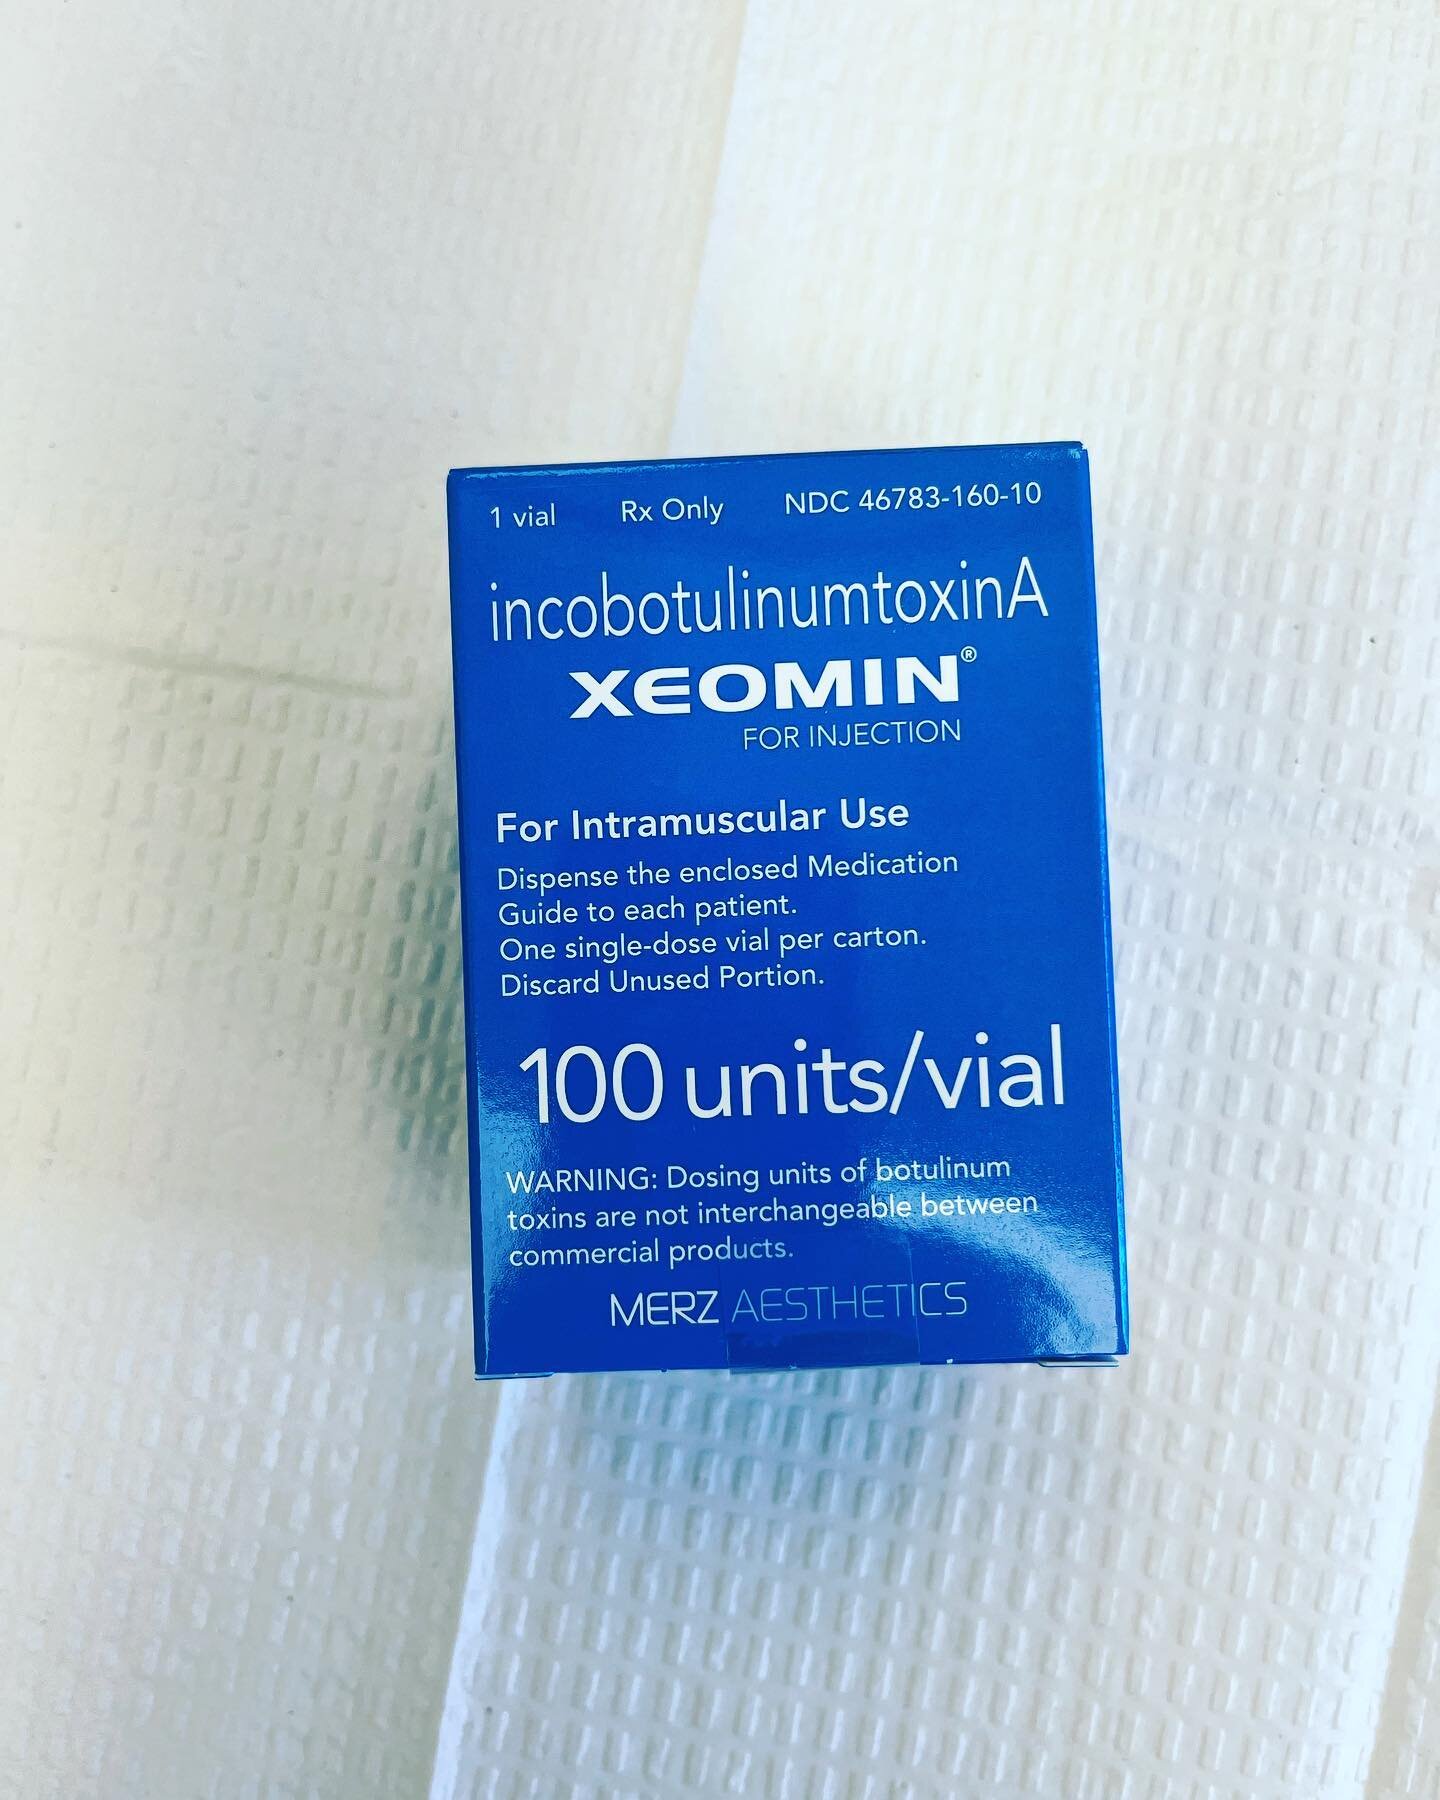 #treatmentthursday 

Xeomin~ The Naked Tox! 🥰💉

Have you heard of Xeomin? 
Xeomin is most commonly referred to as the &ldquo;Naked Tox&rdquo; 

This because Xeomin unlike Dysport or Botox, does not have an accompanying, inactive protein. 

Xeomin i